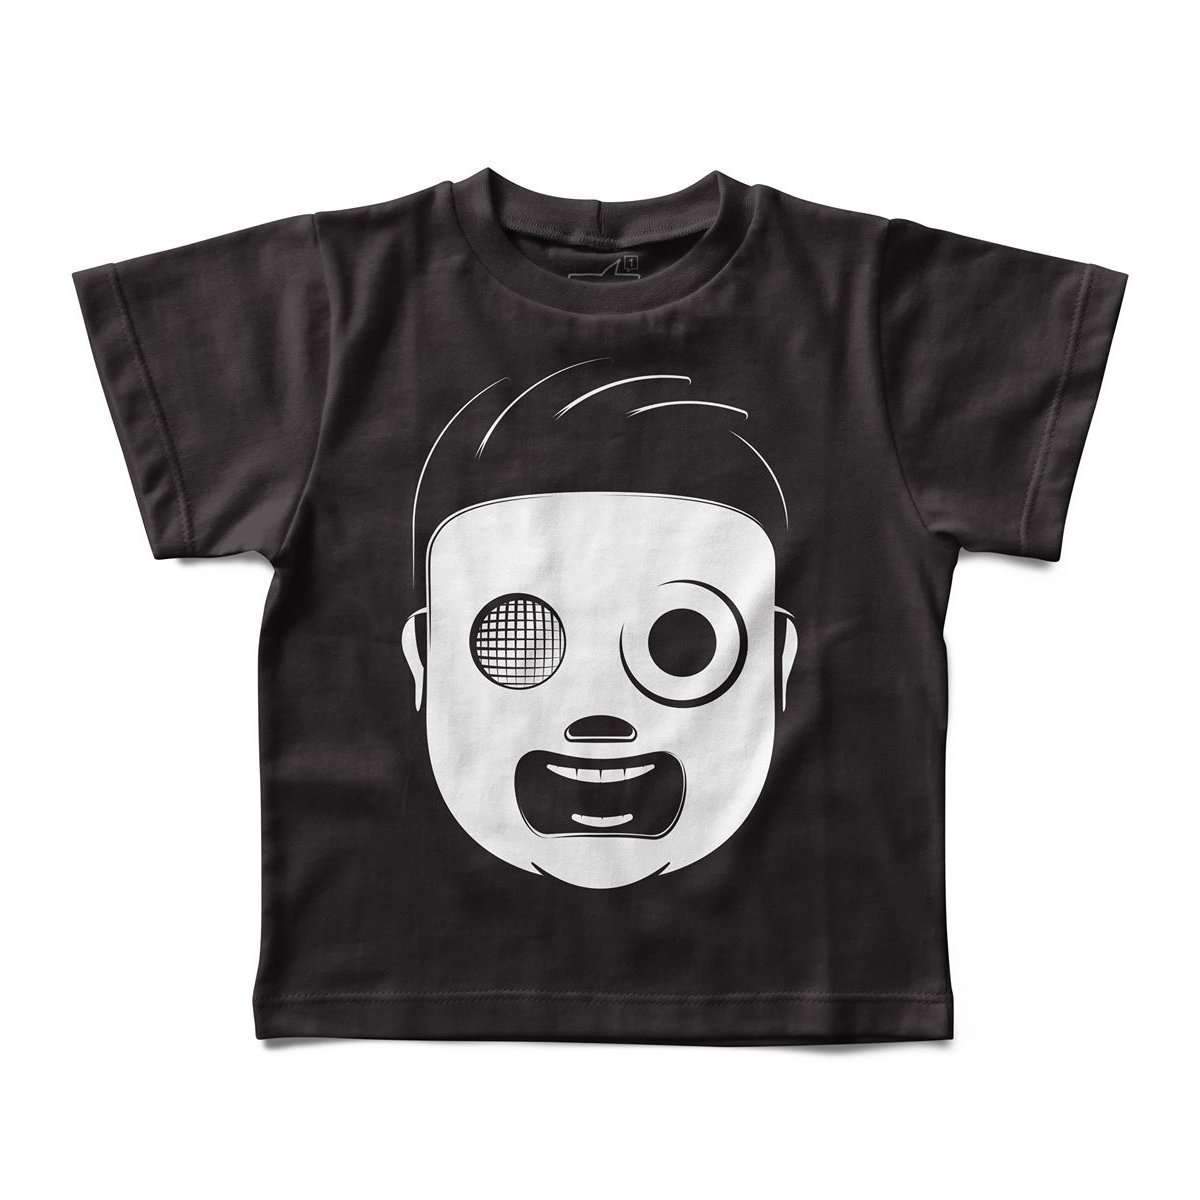 Kids Slipknot t-shirt with baby Cory in black